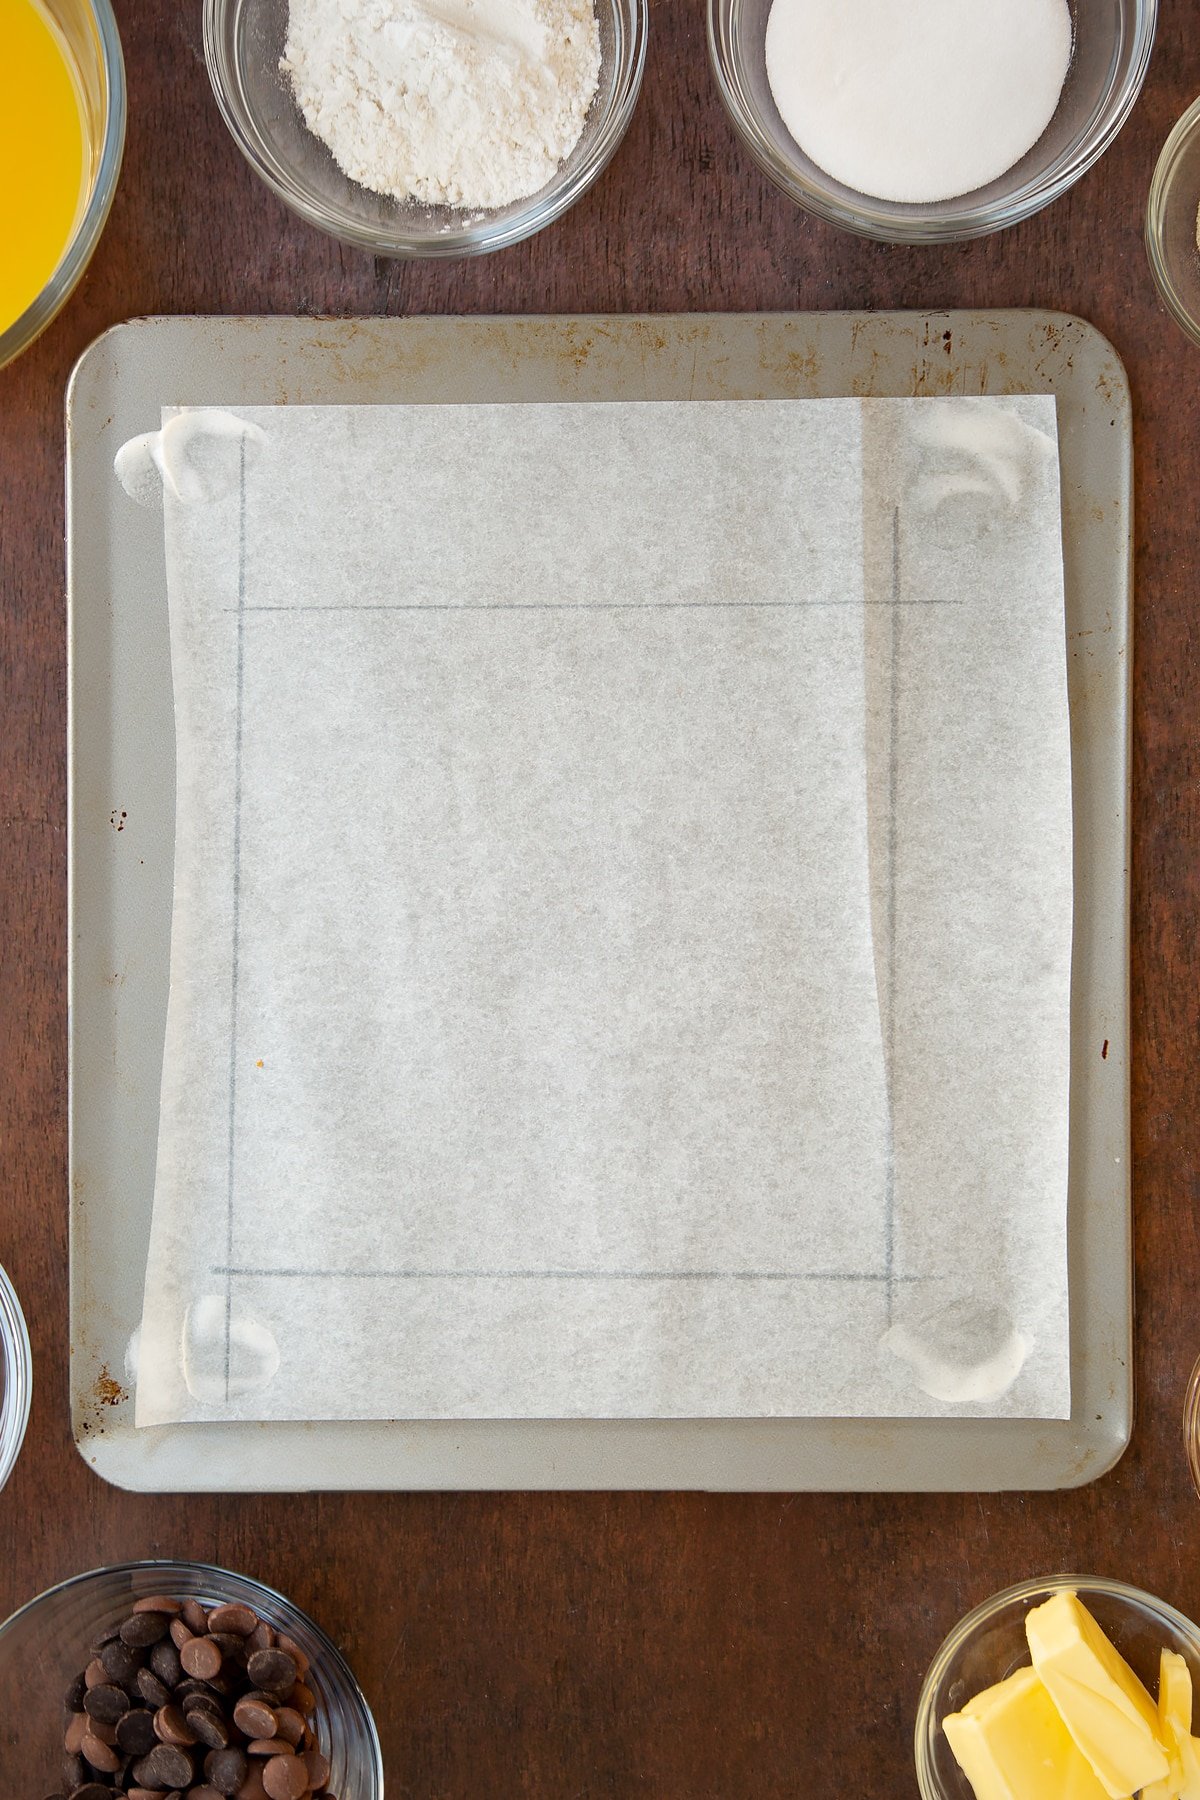 Overhead shot of baking paper with pencil markings using a ruler.